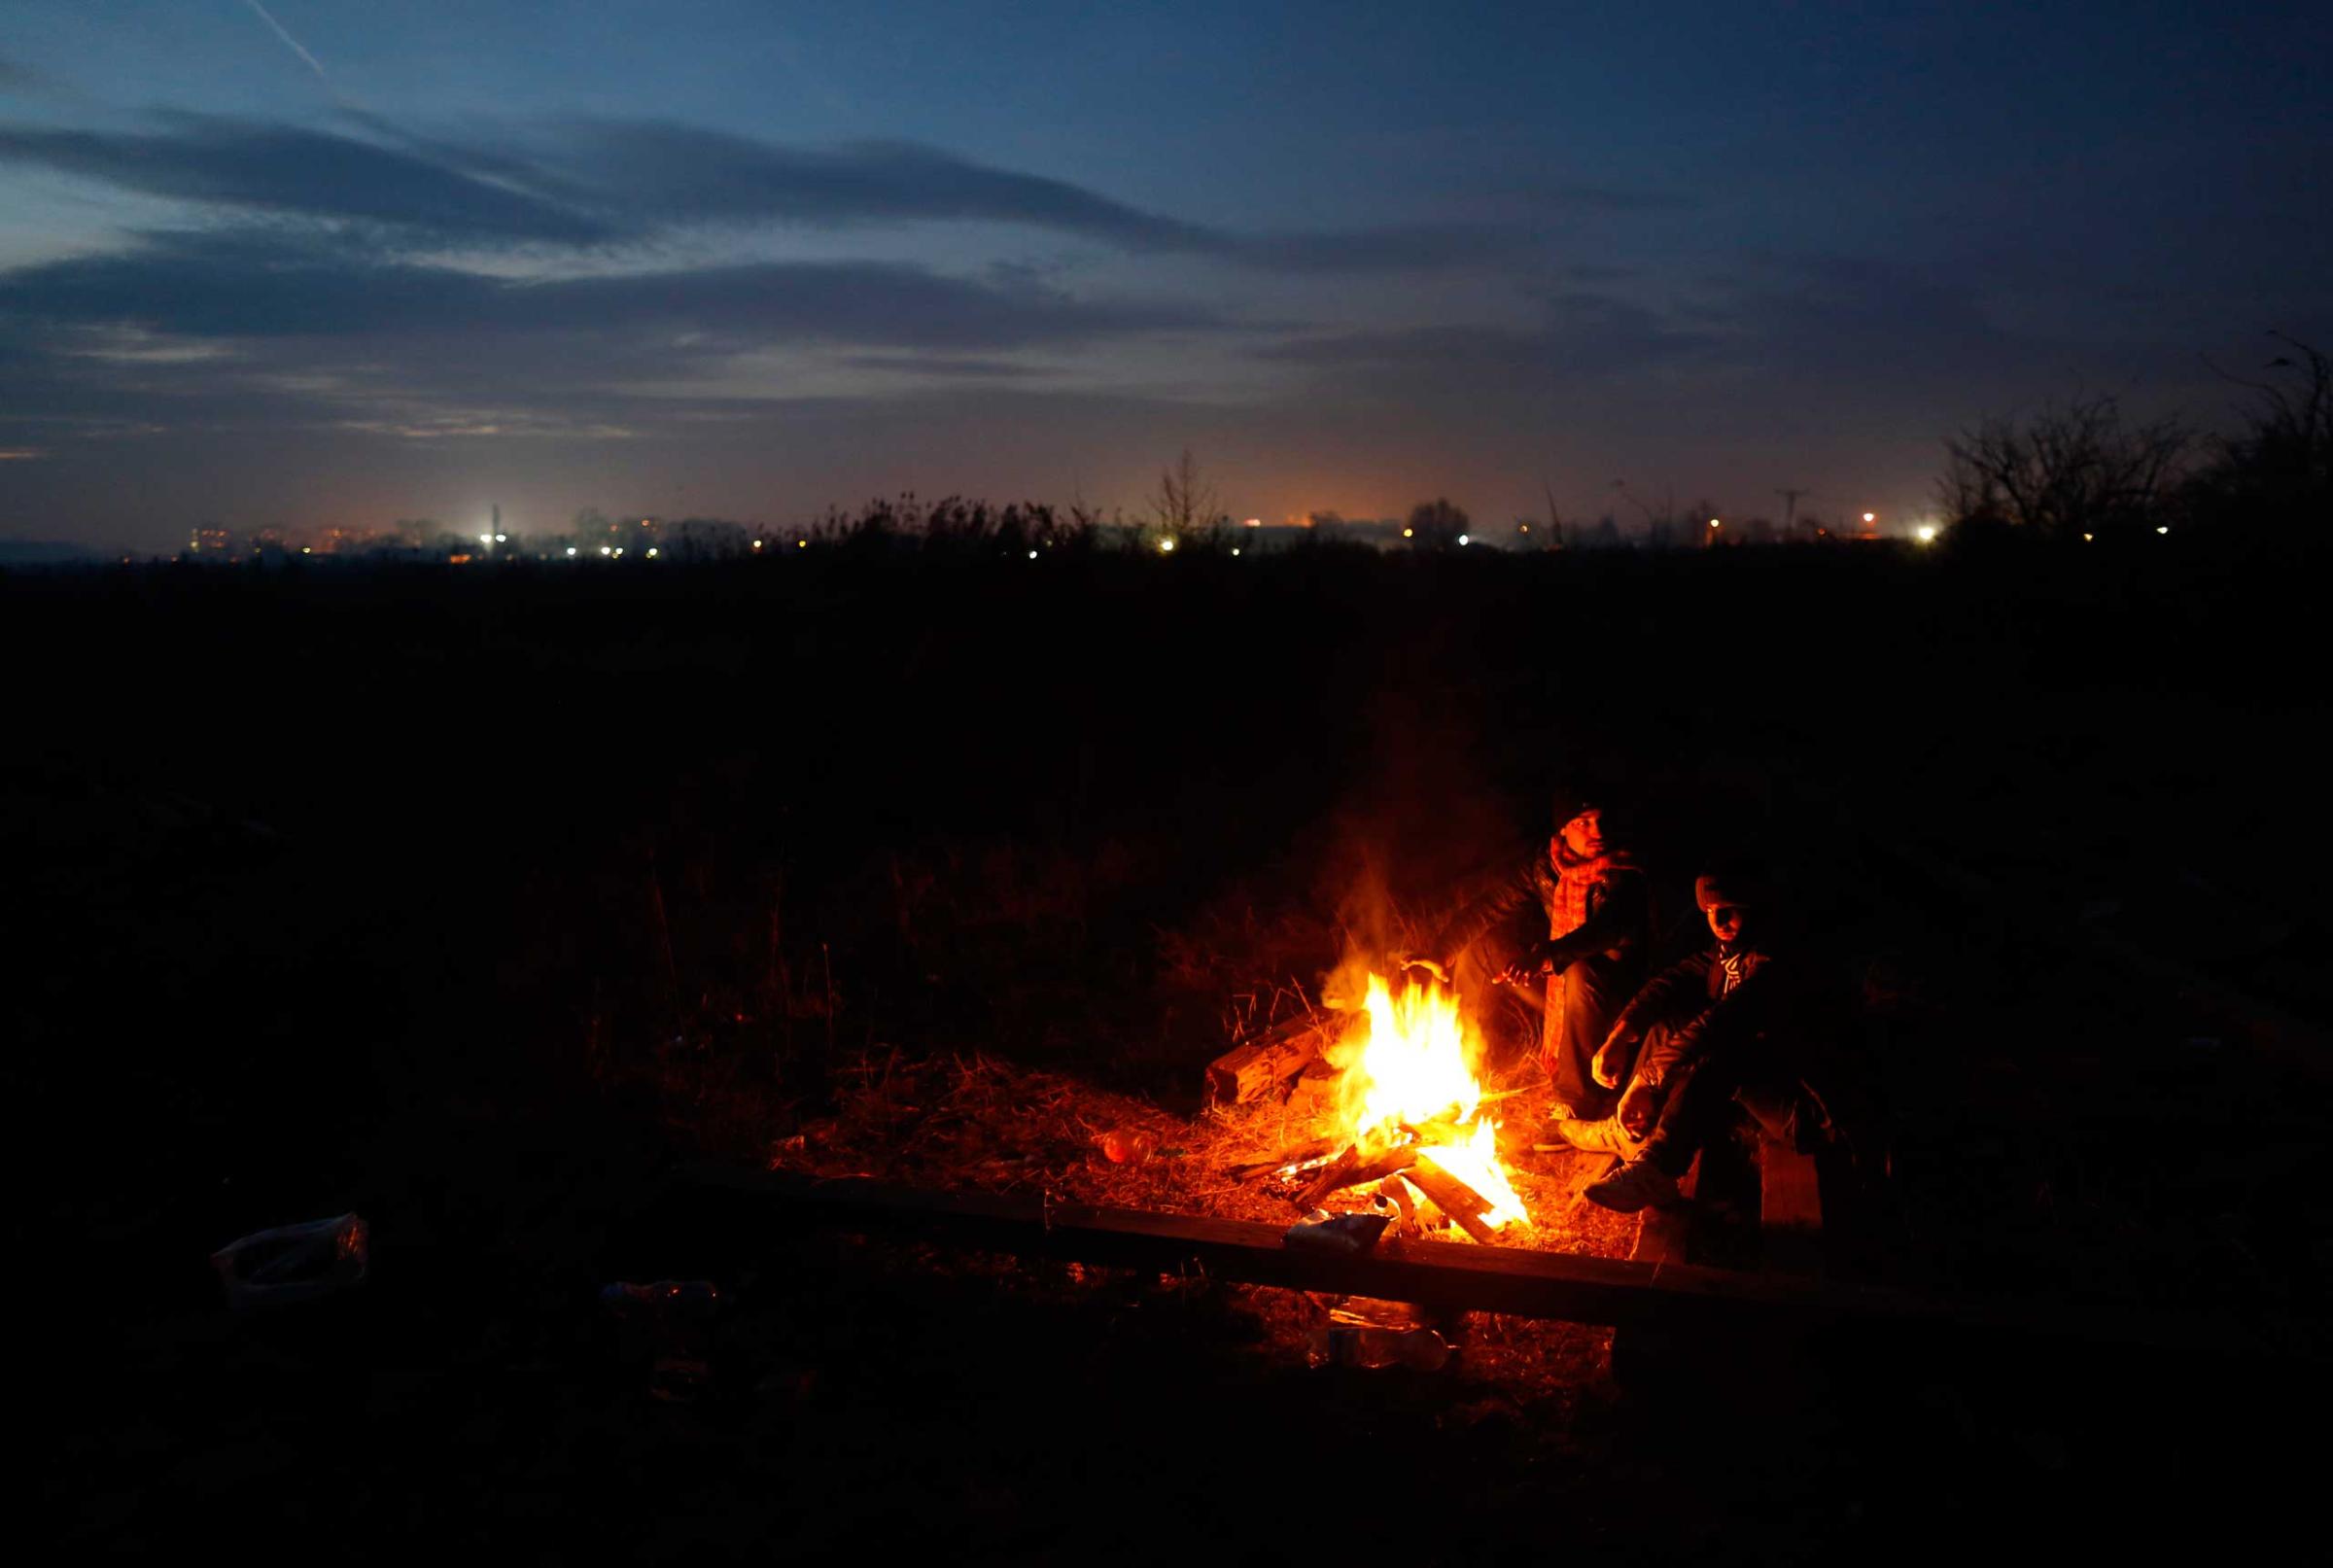 Migrants gather around the fire which they use for cooking and for warmth in the abandoned brick factory in the northern Serbian town of Subotica, near the border between Serbia and Hungary, on Dec. 15, 2014.